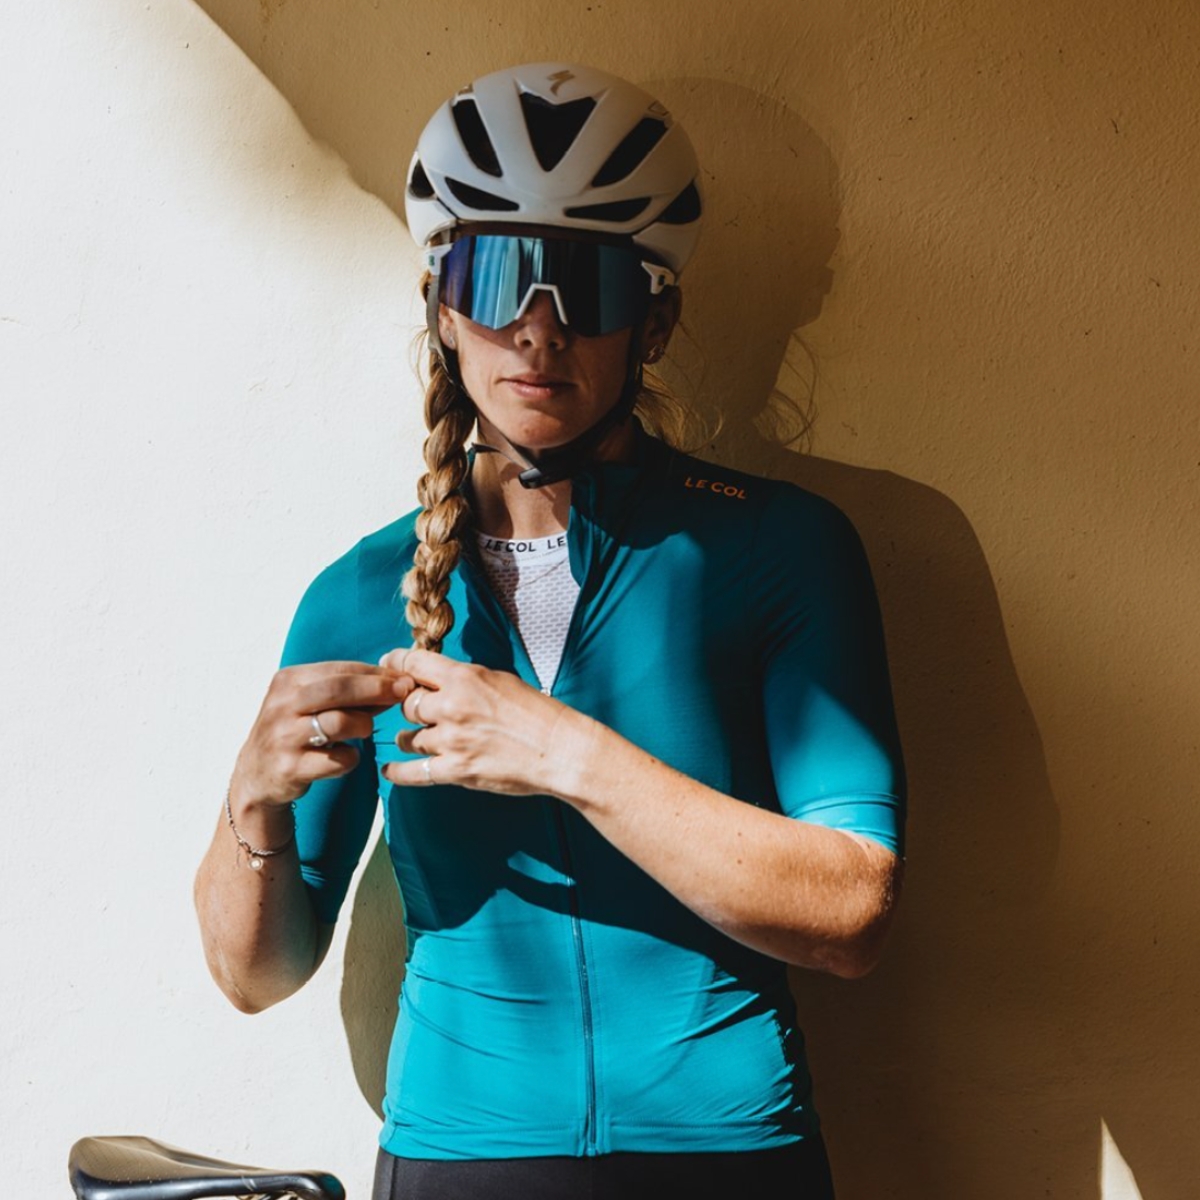 Woman with braid wearing Lecol cycling clothing brand